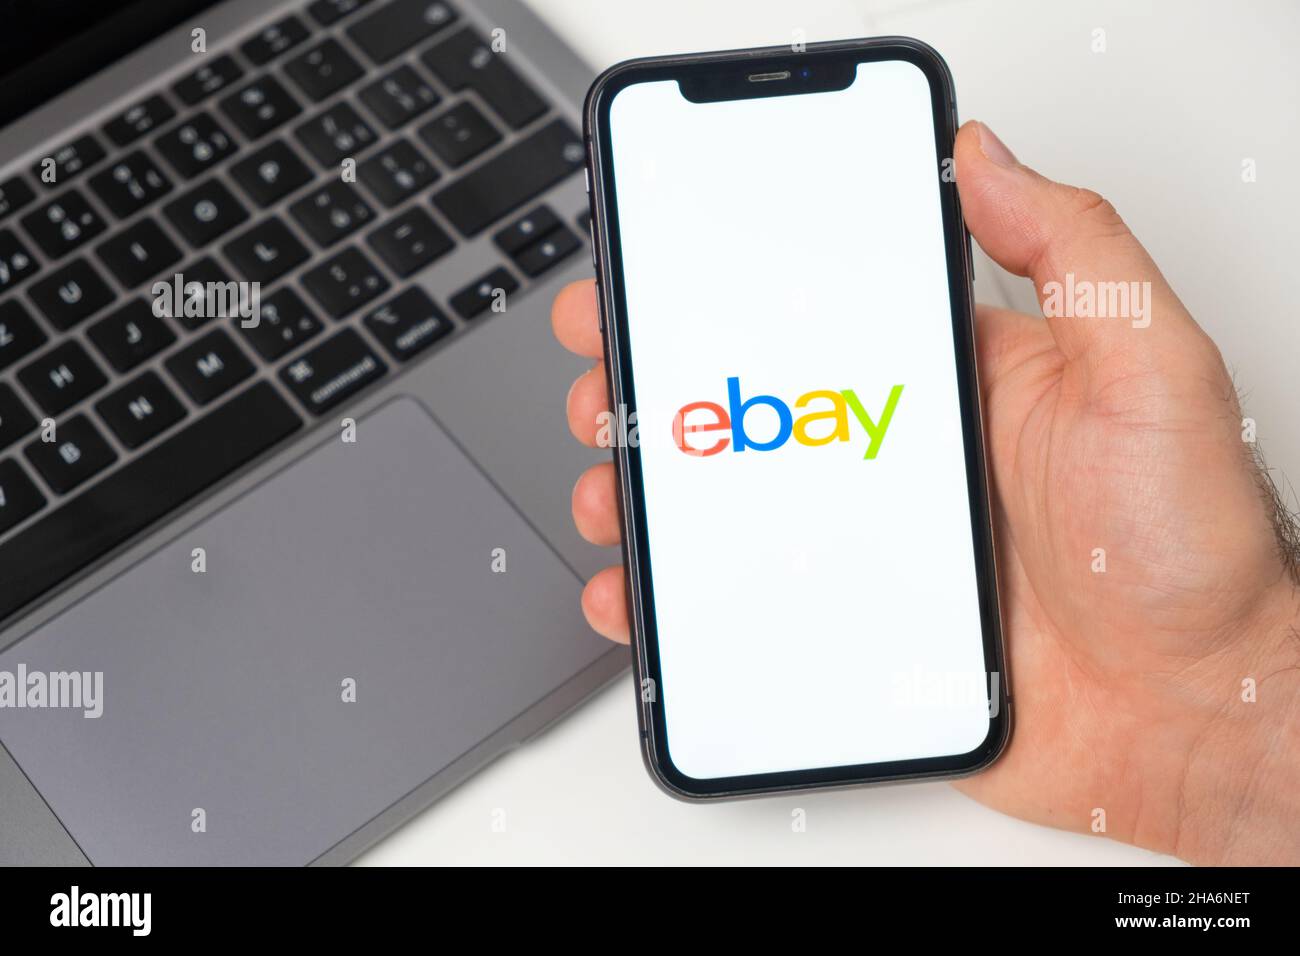 Ebay the application is open in the smartphone. The man is holding a mobile phone in his hand, the company application is open on the screen. Secure online shopping. November 2021, San Francisco, USA Stock Photo